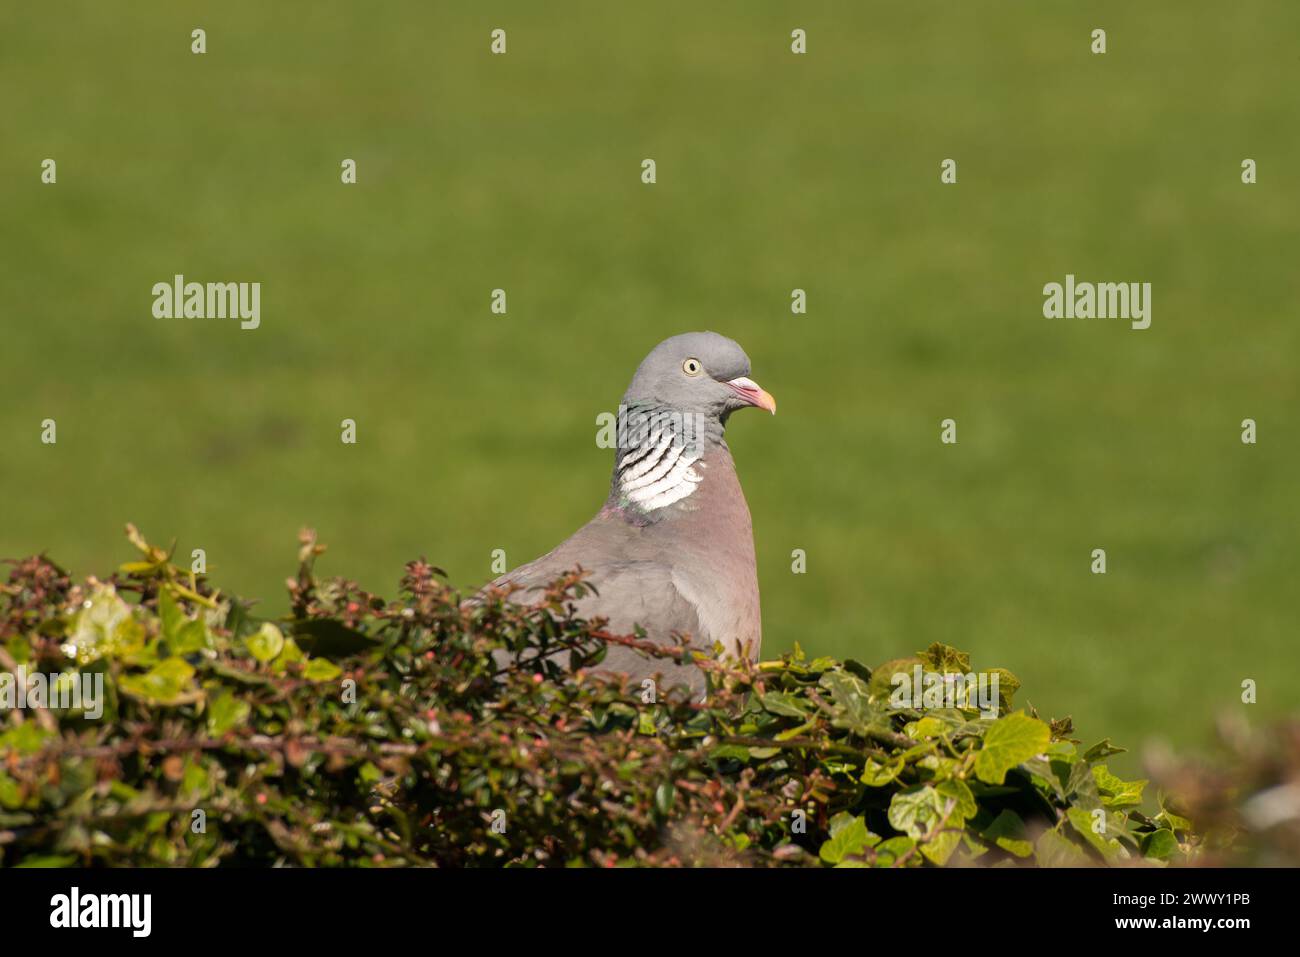 Woodpigeon poking it's head above a bush it is resting on and highlighted against a green background Stock Photo